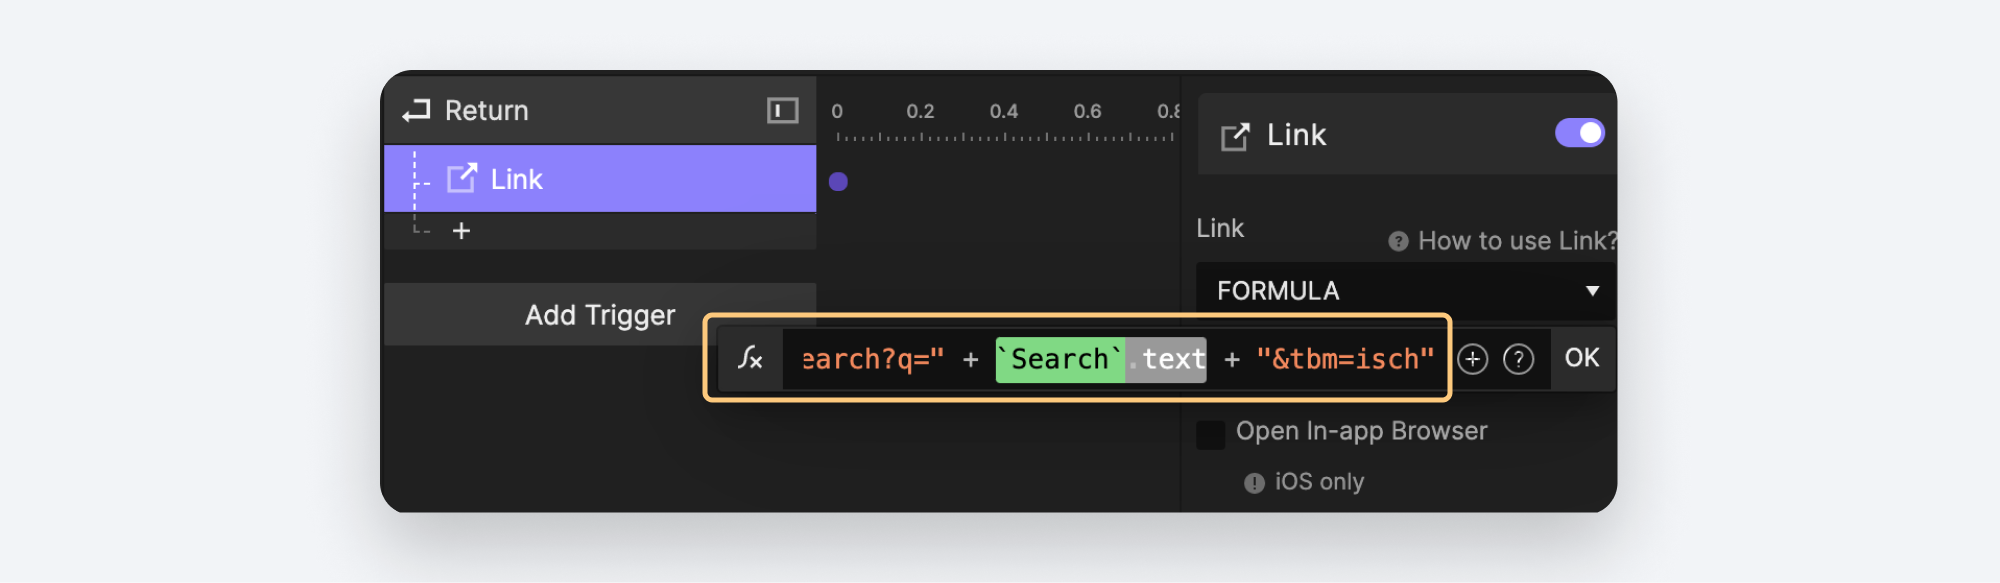 search text formula